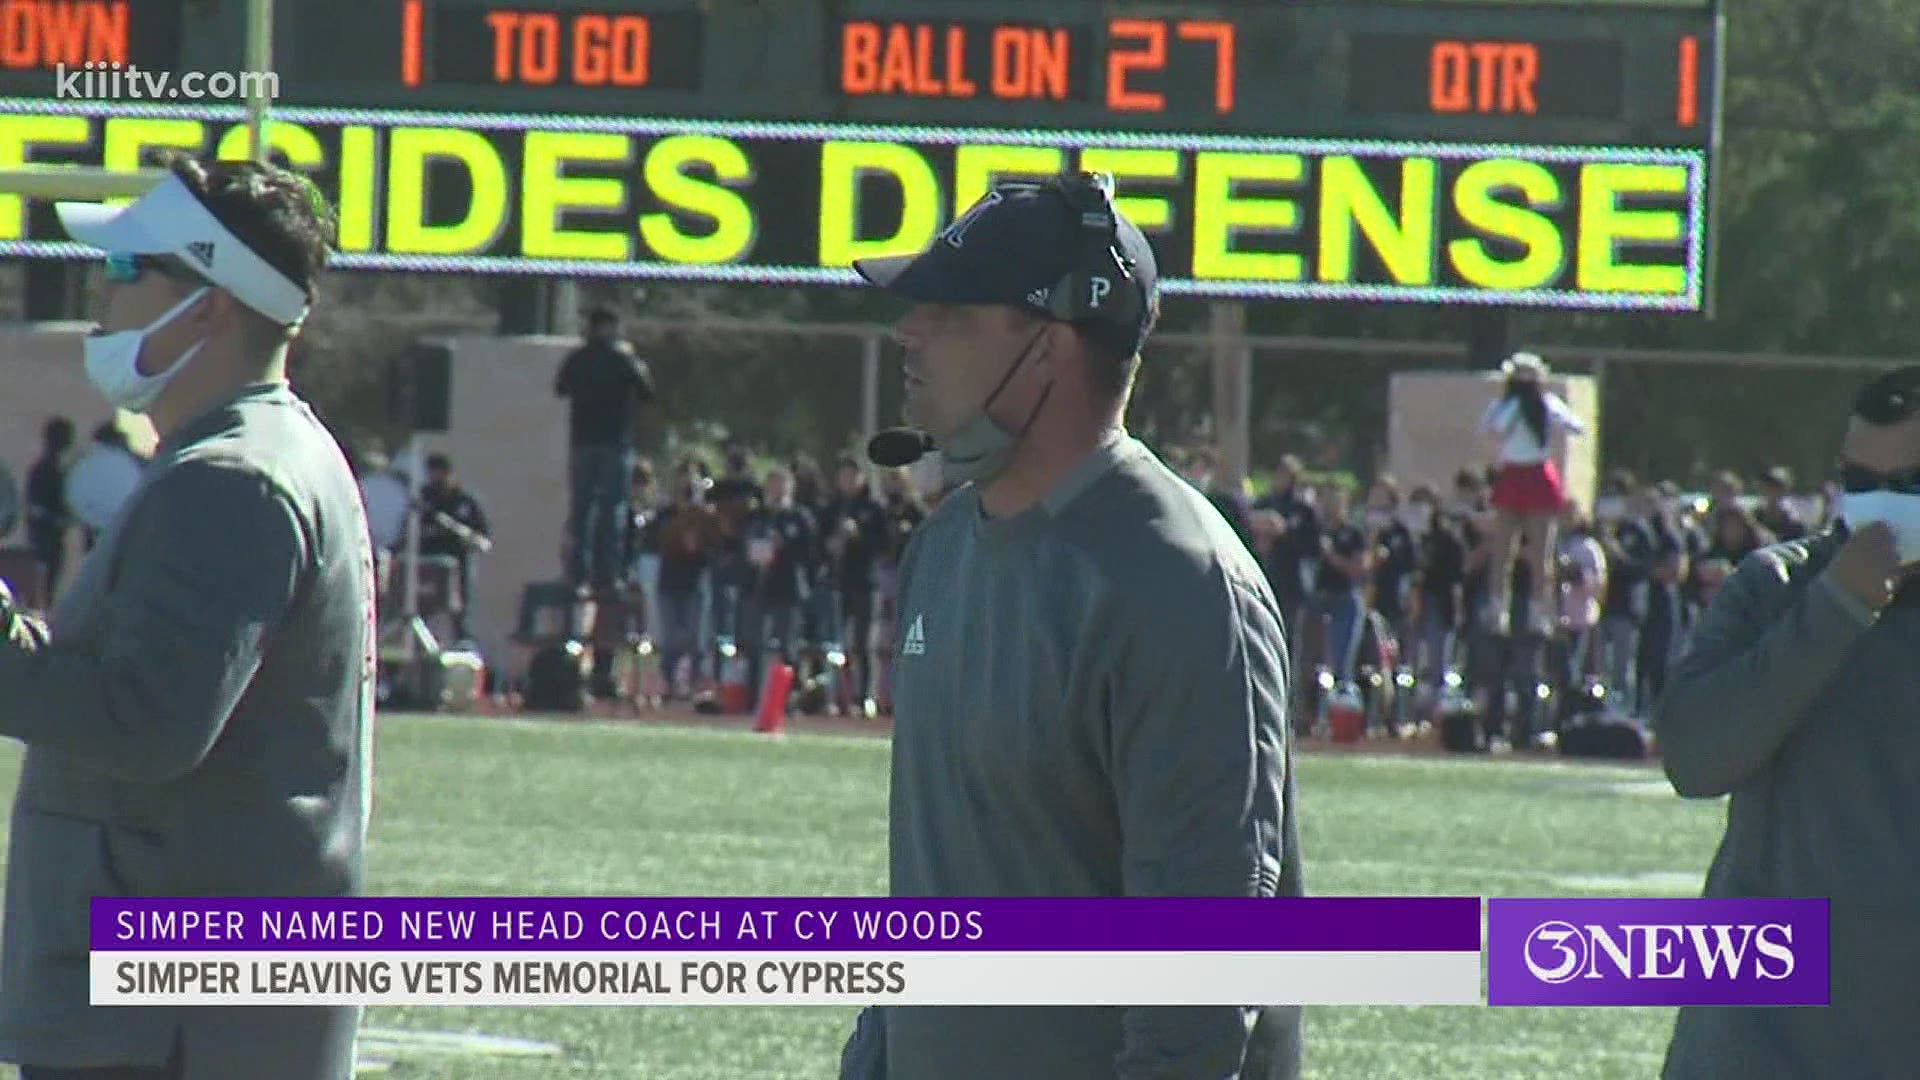 Simper was a part of the Coastal Bend head coaching ranks for the last 11 years with stops at both Ray and Veterans Memorial.